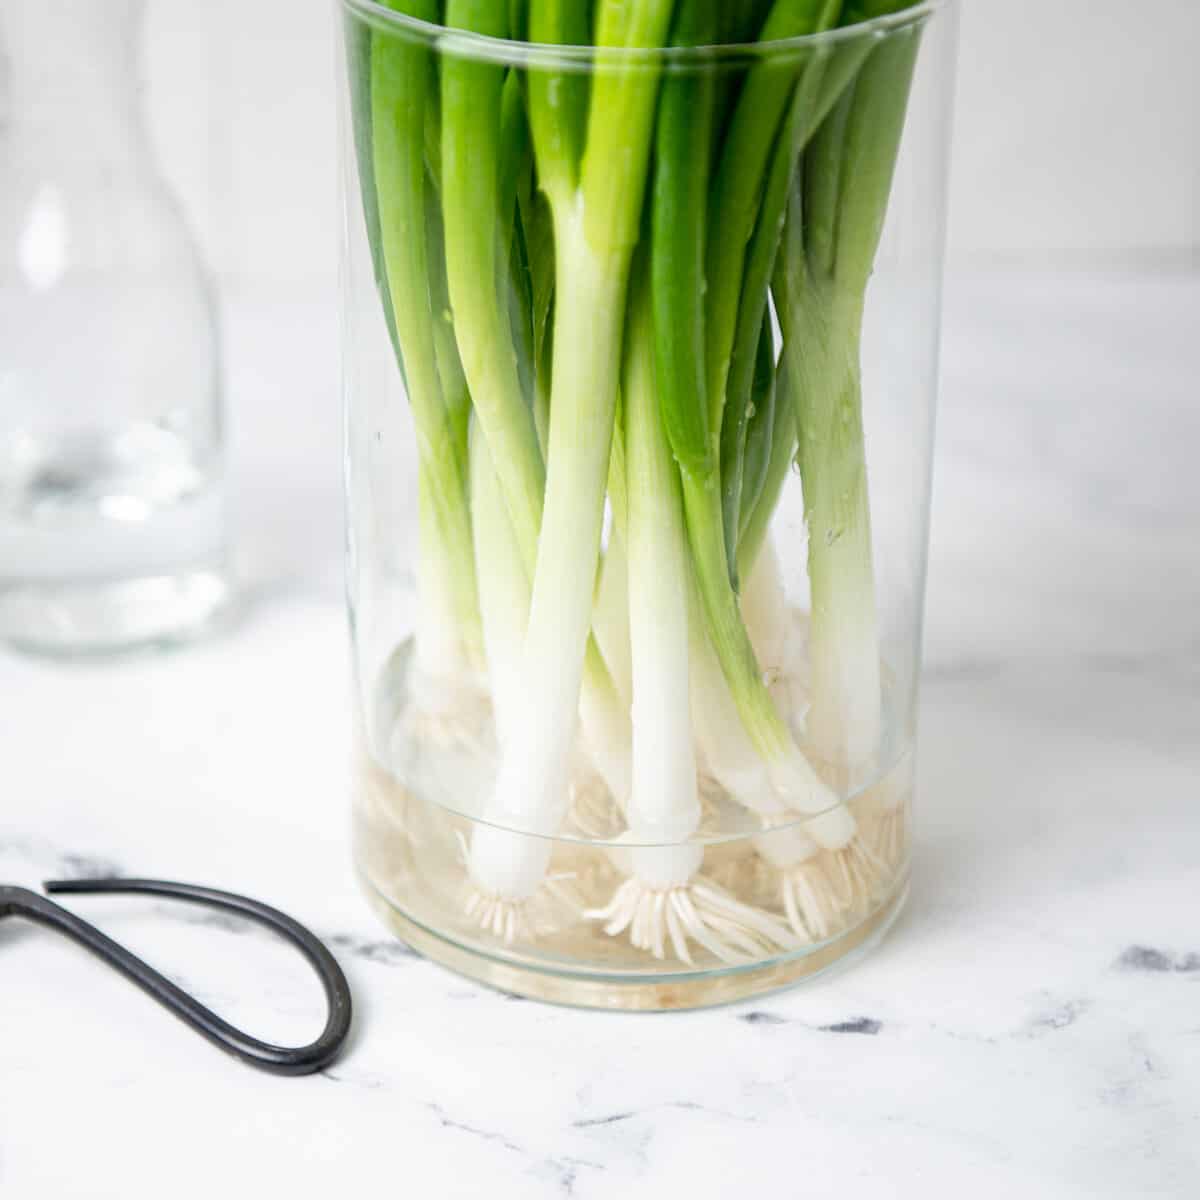 Scallions in a jar with water.